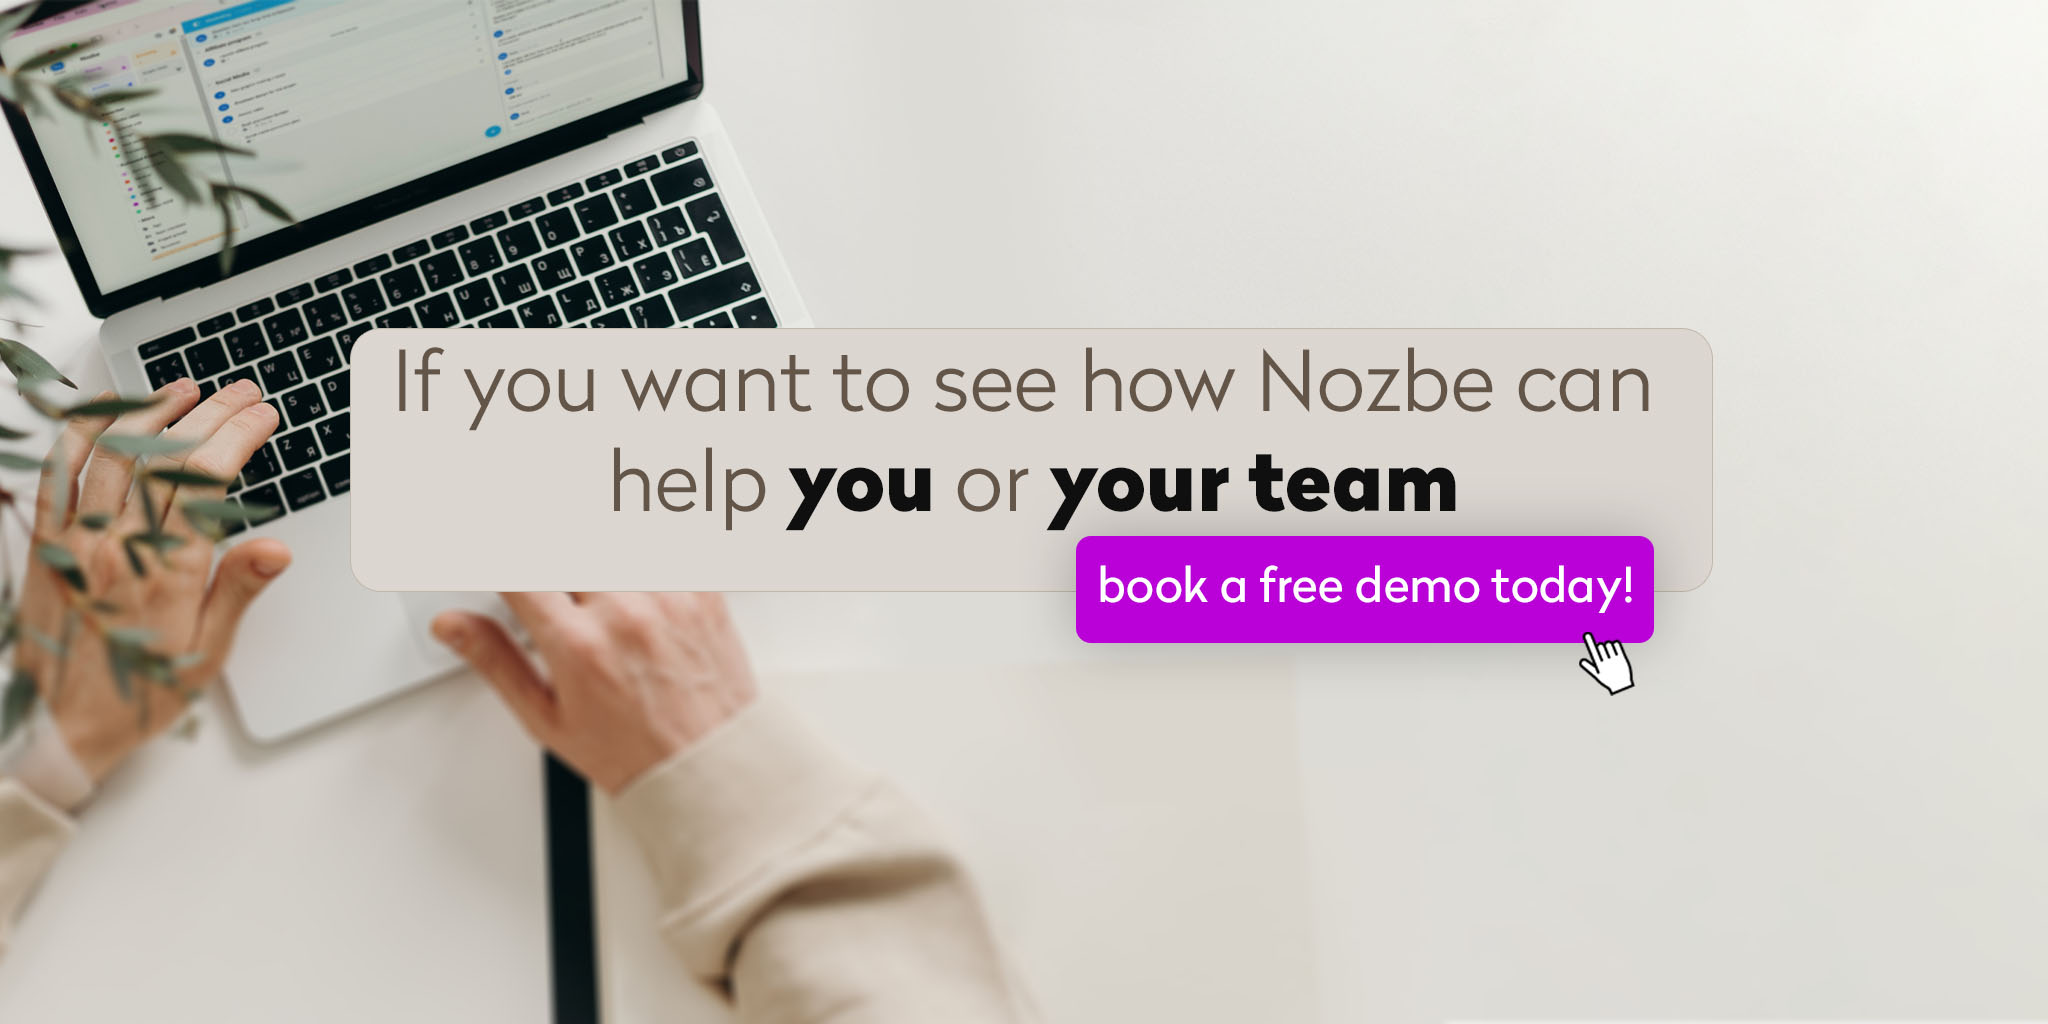 Book a free demo and see how nozbe can help your team